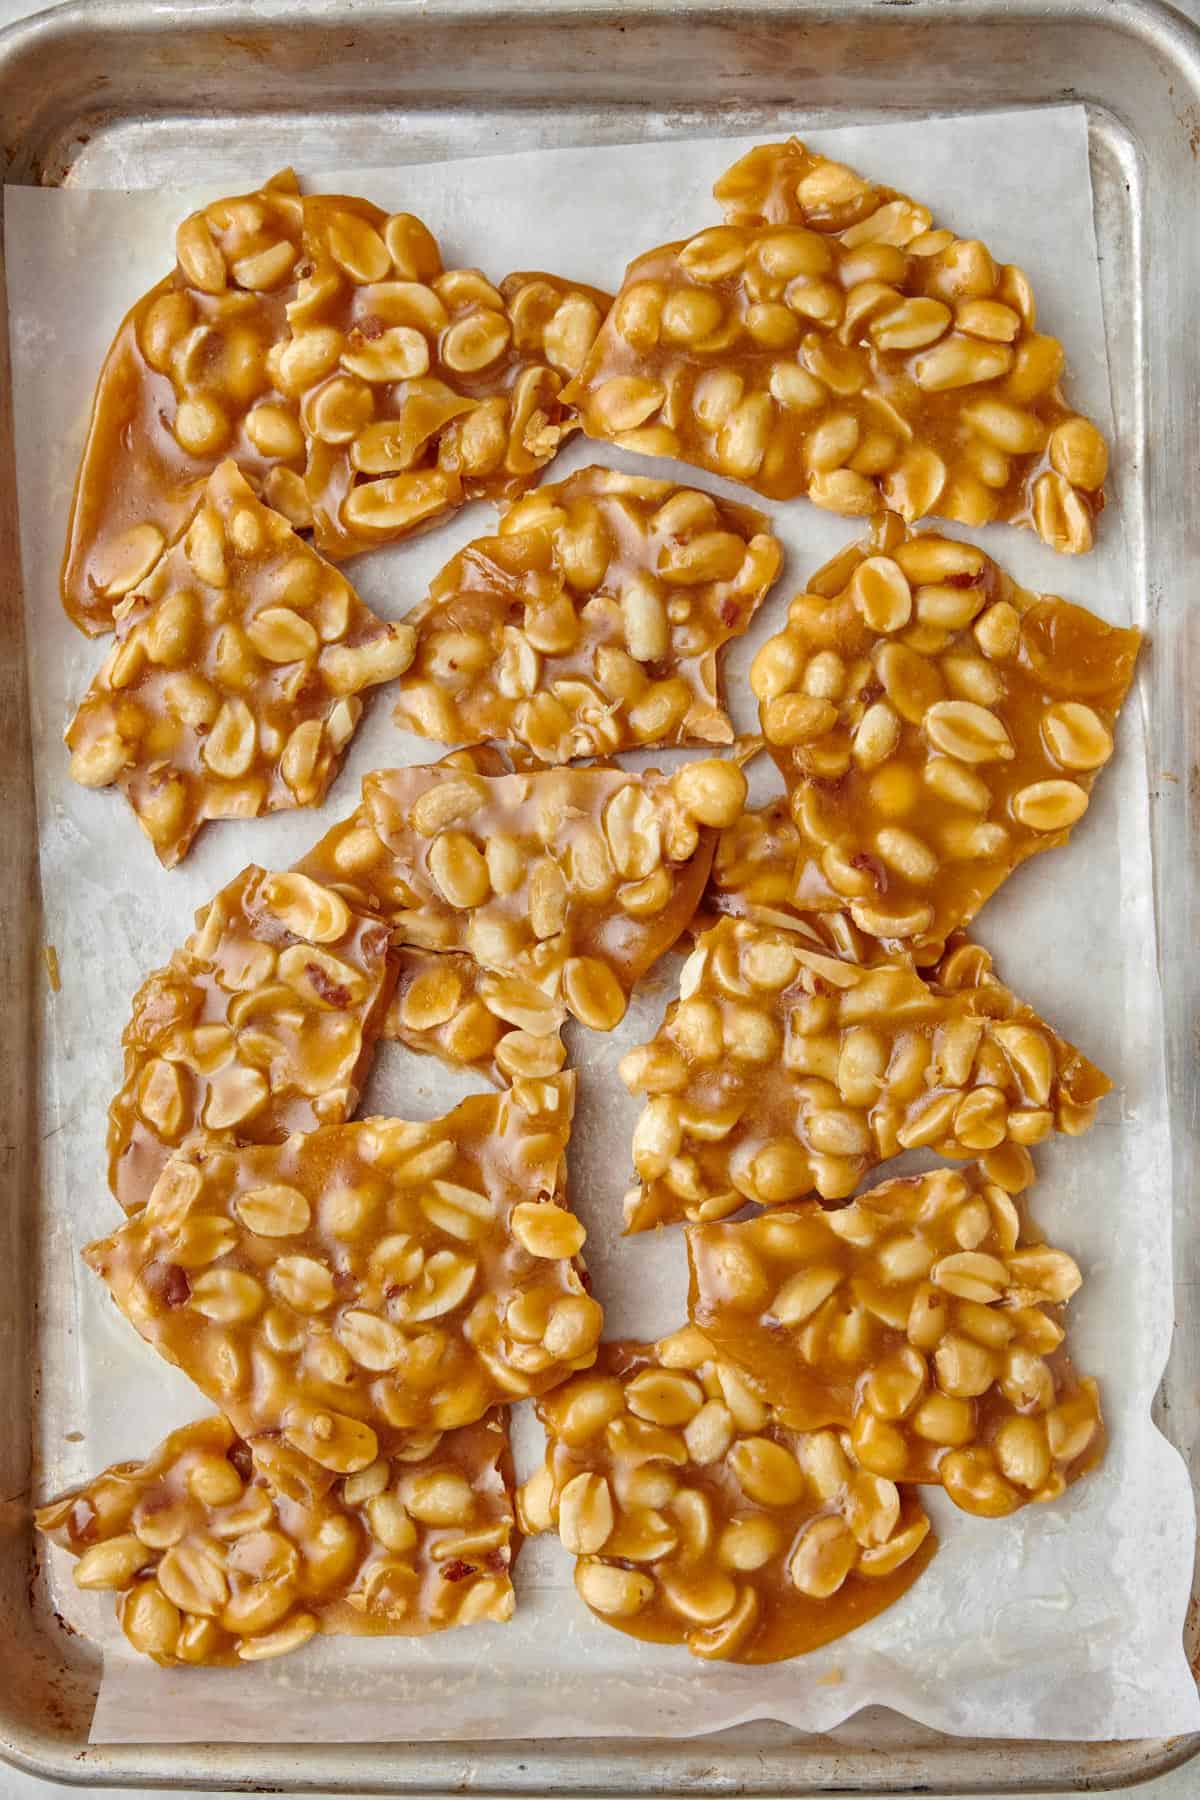 Peanut brittle broken into large pieces on a sheet pan.